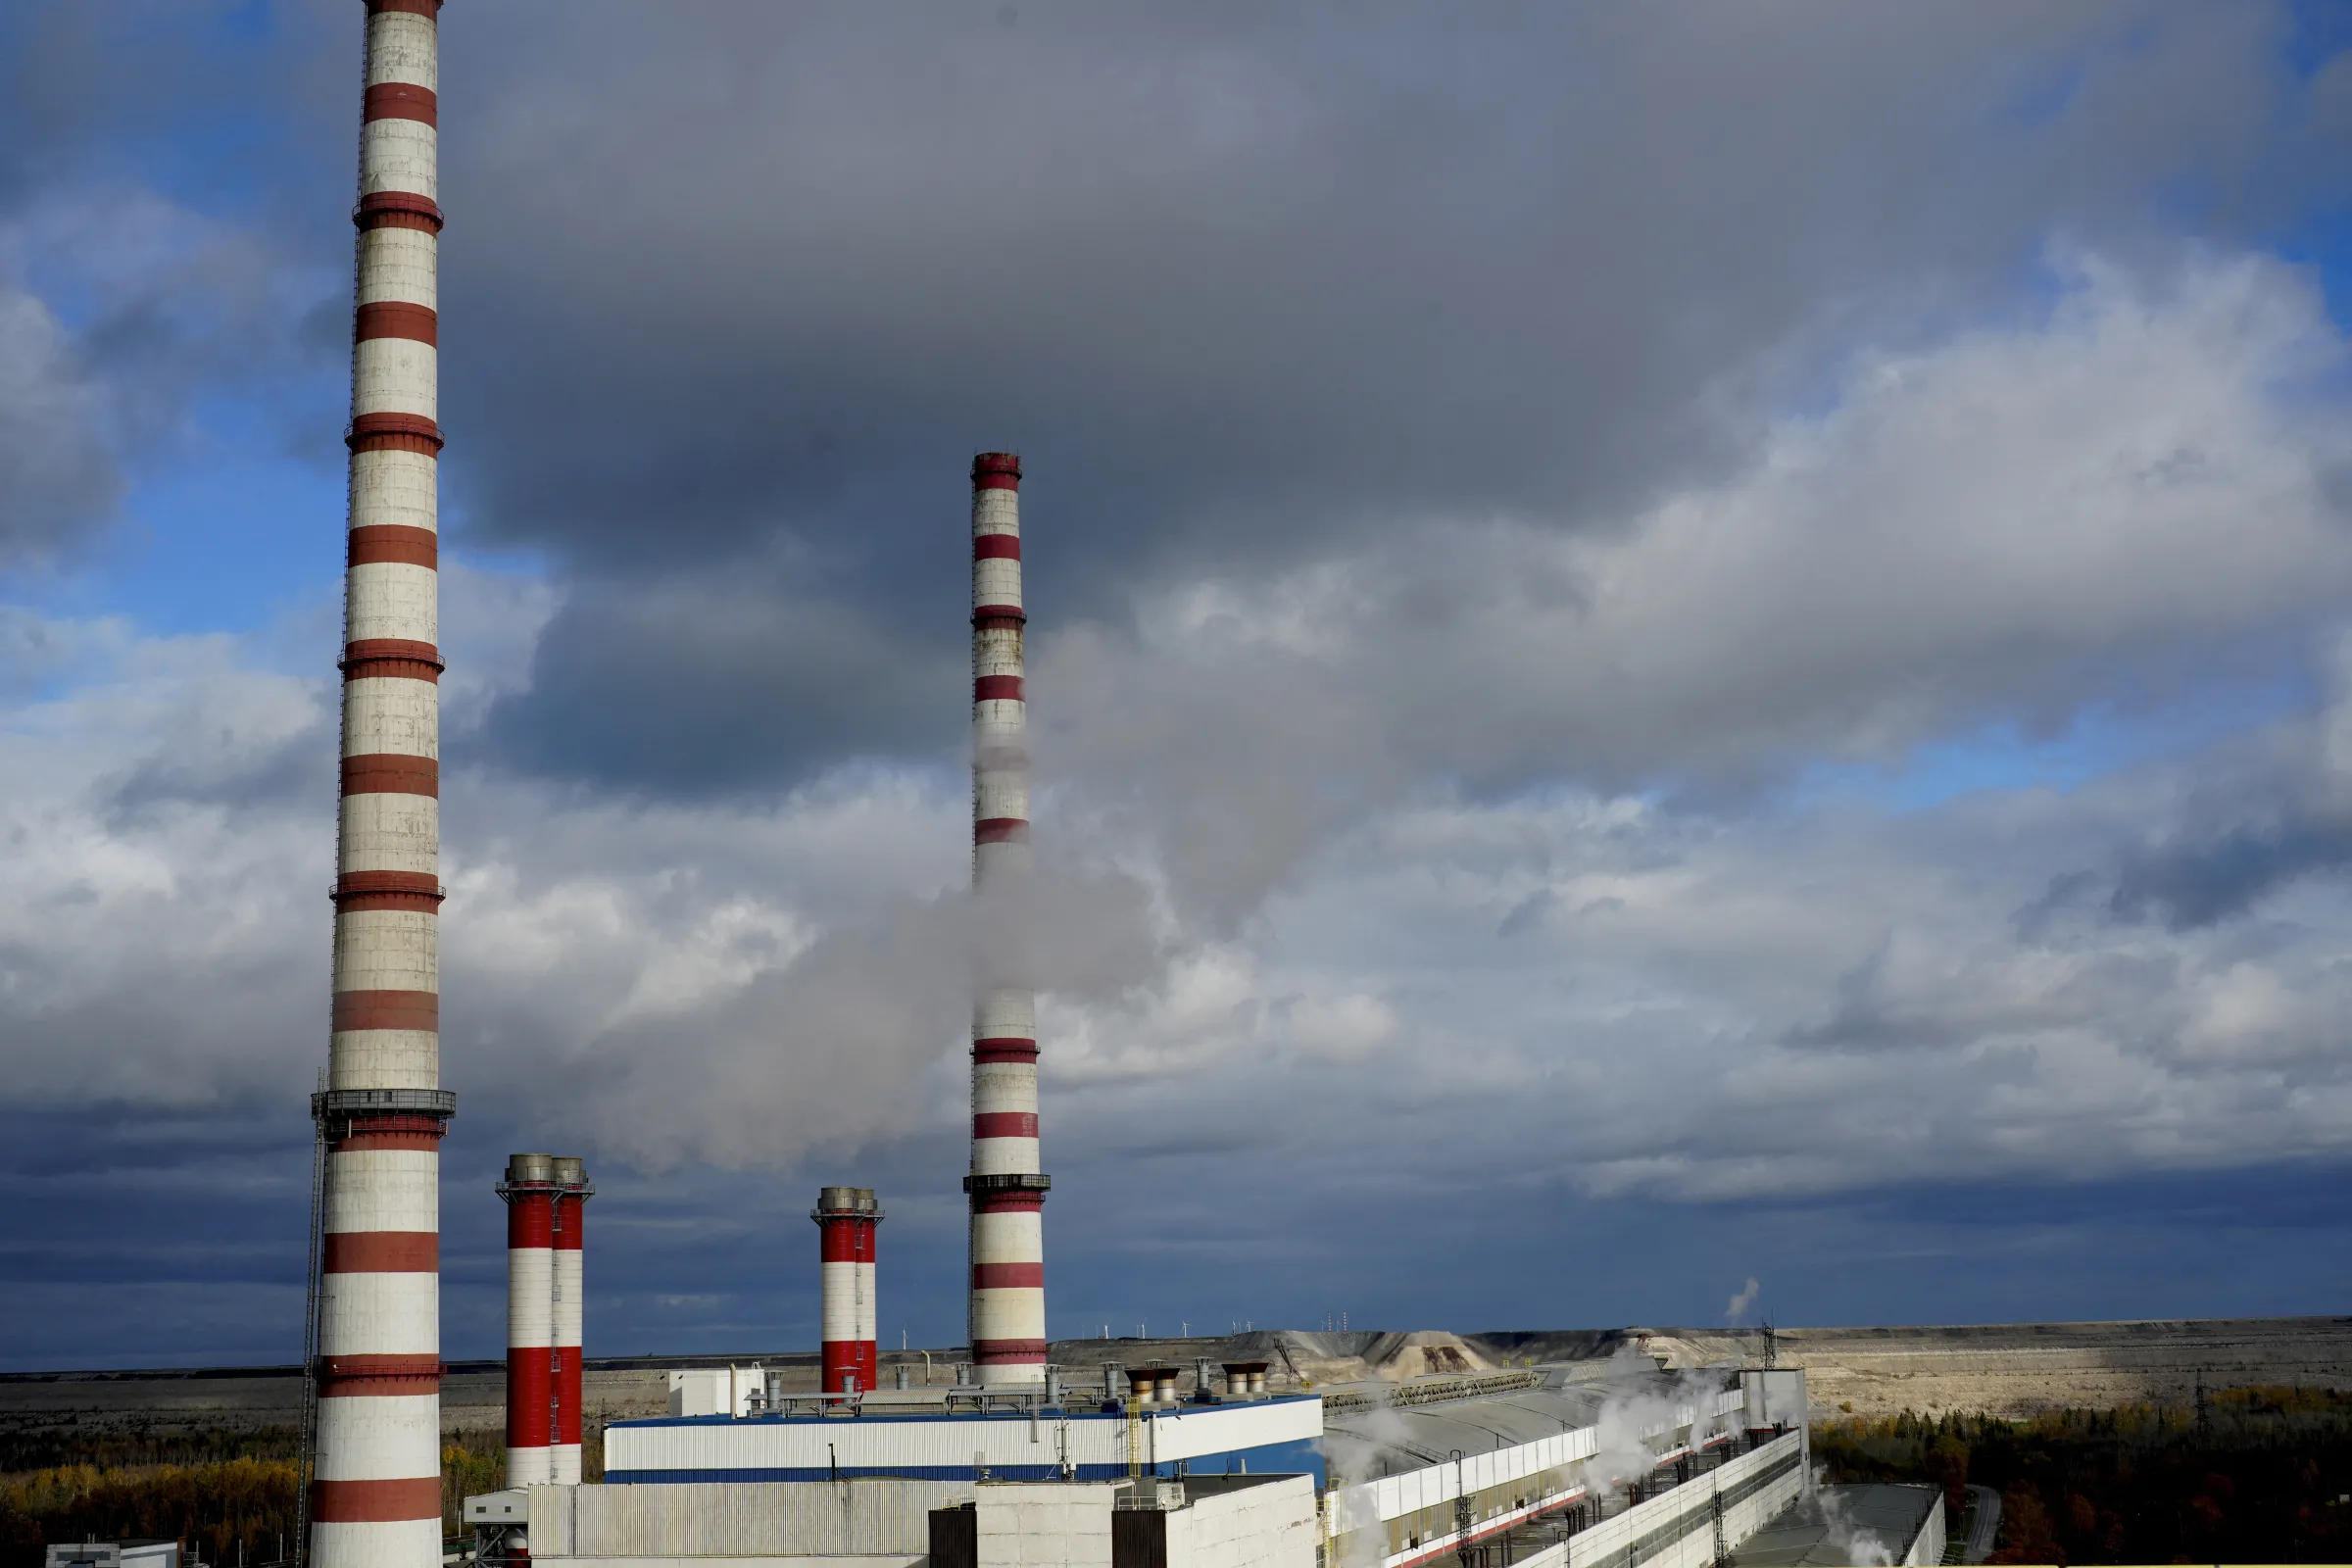 A rooftop view of the oil shale-fired power plant in Auvere, Estonia October 17, 2022. REUTERS/Ints Kalnins